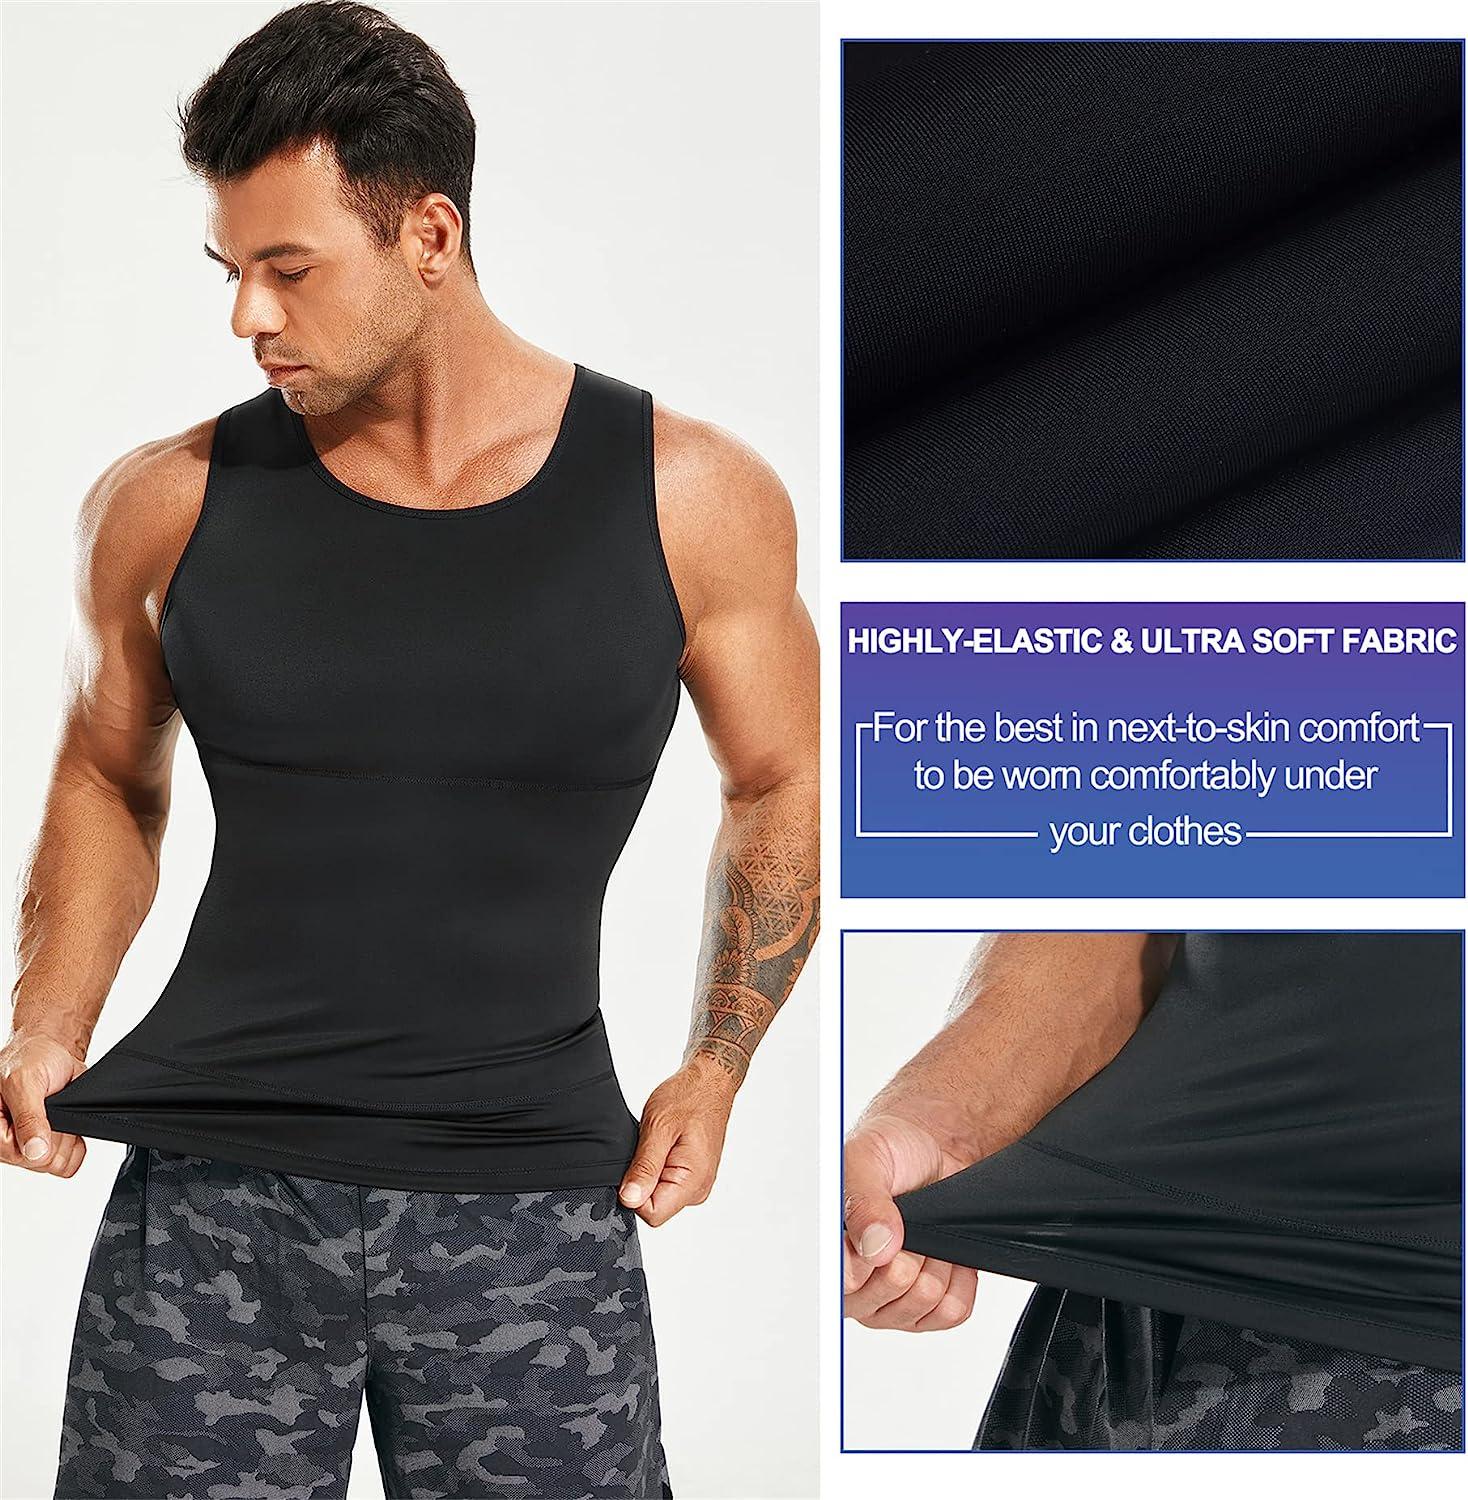 A slimmer, confident figure with our Tank Top shaping shirts for men